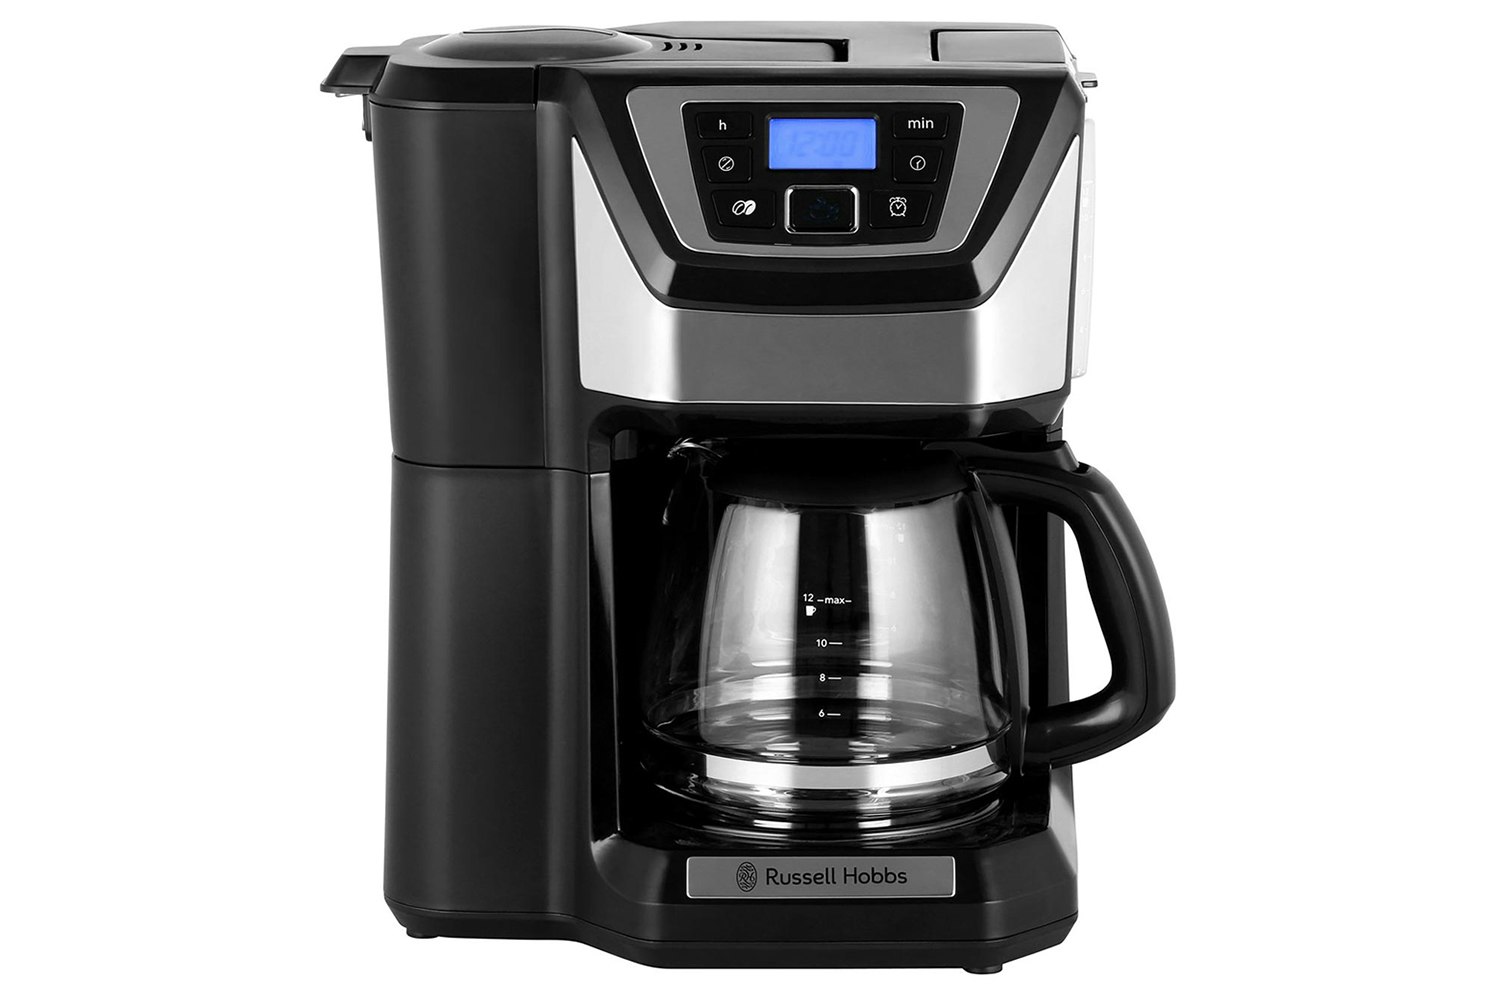 Russell Hobbs Grind & Brew 22000 Coffee Machine in Black**FREE DELIVERY**